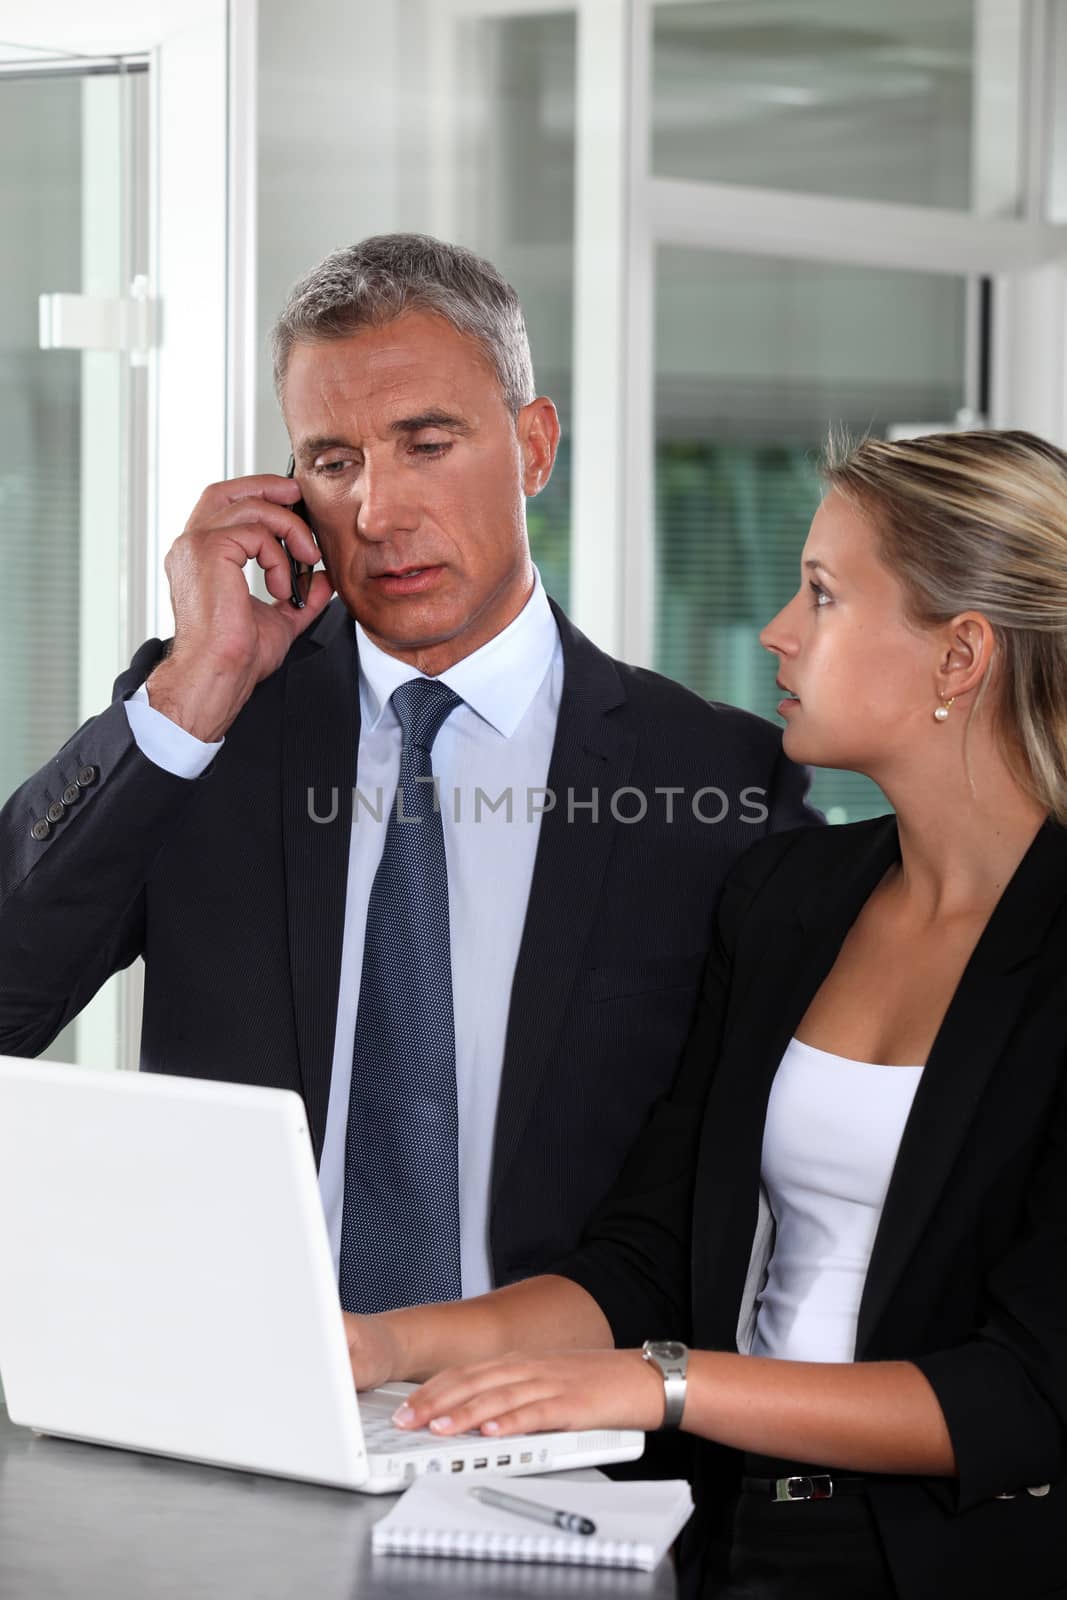 Boss working closely with female colleague by phovoir